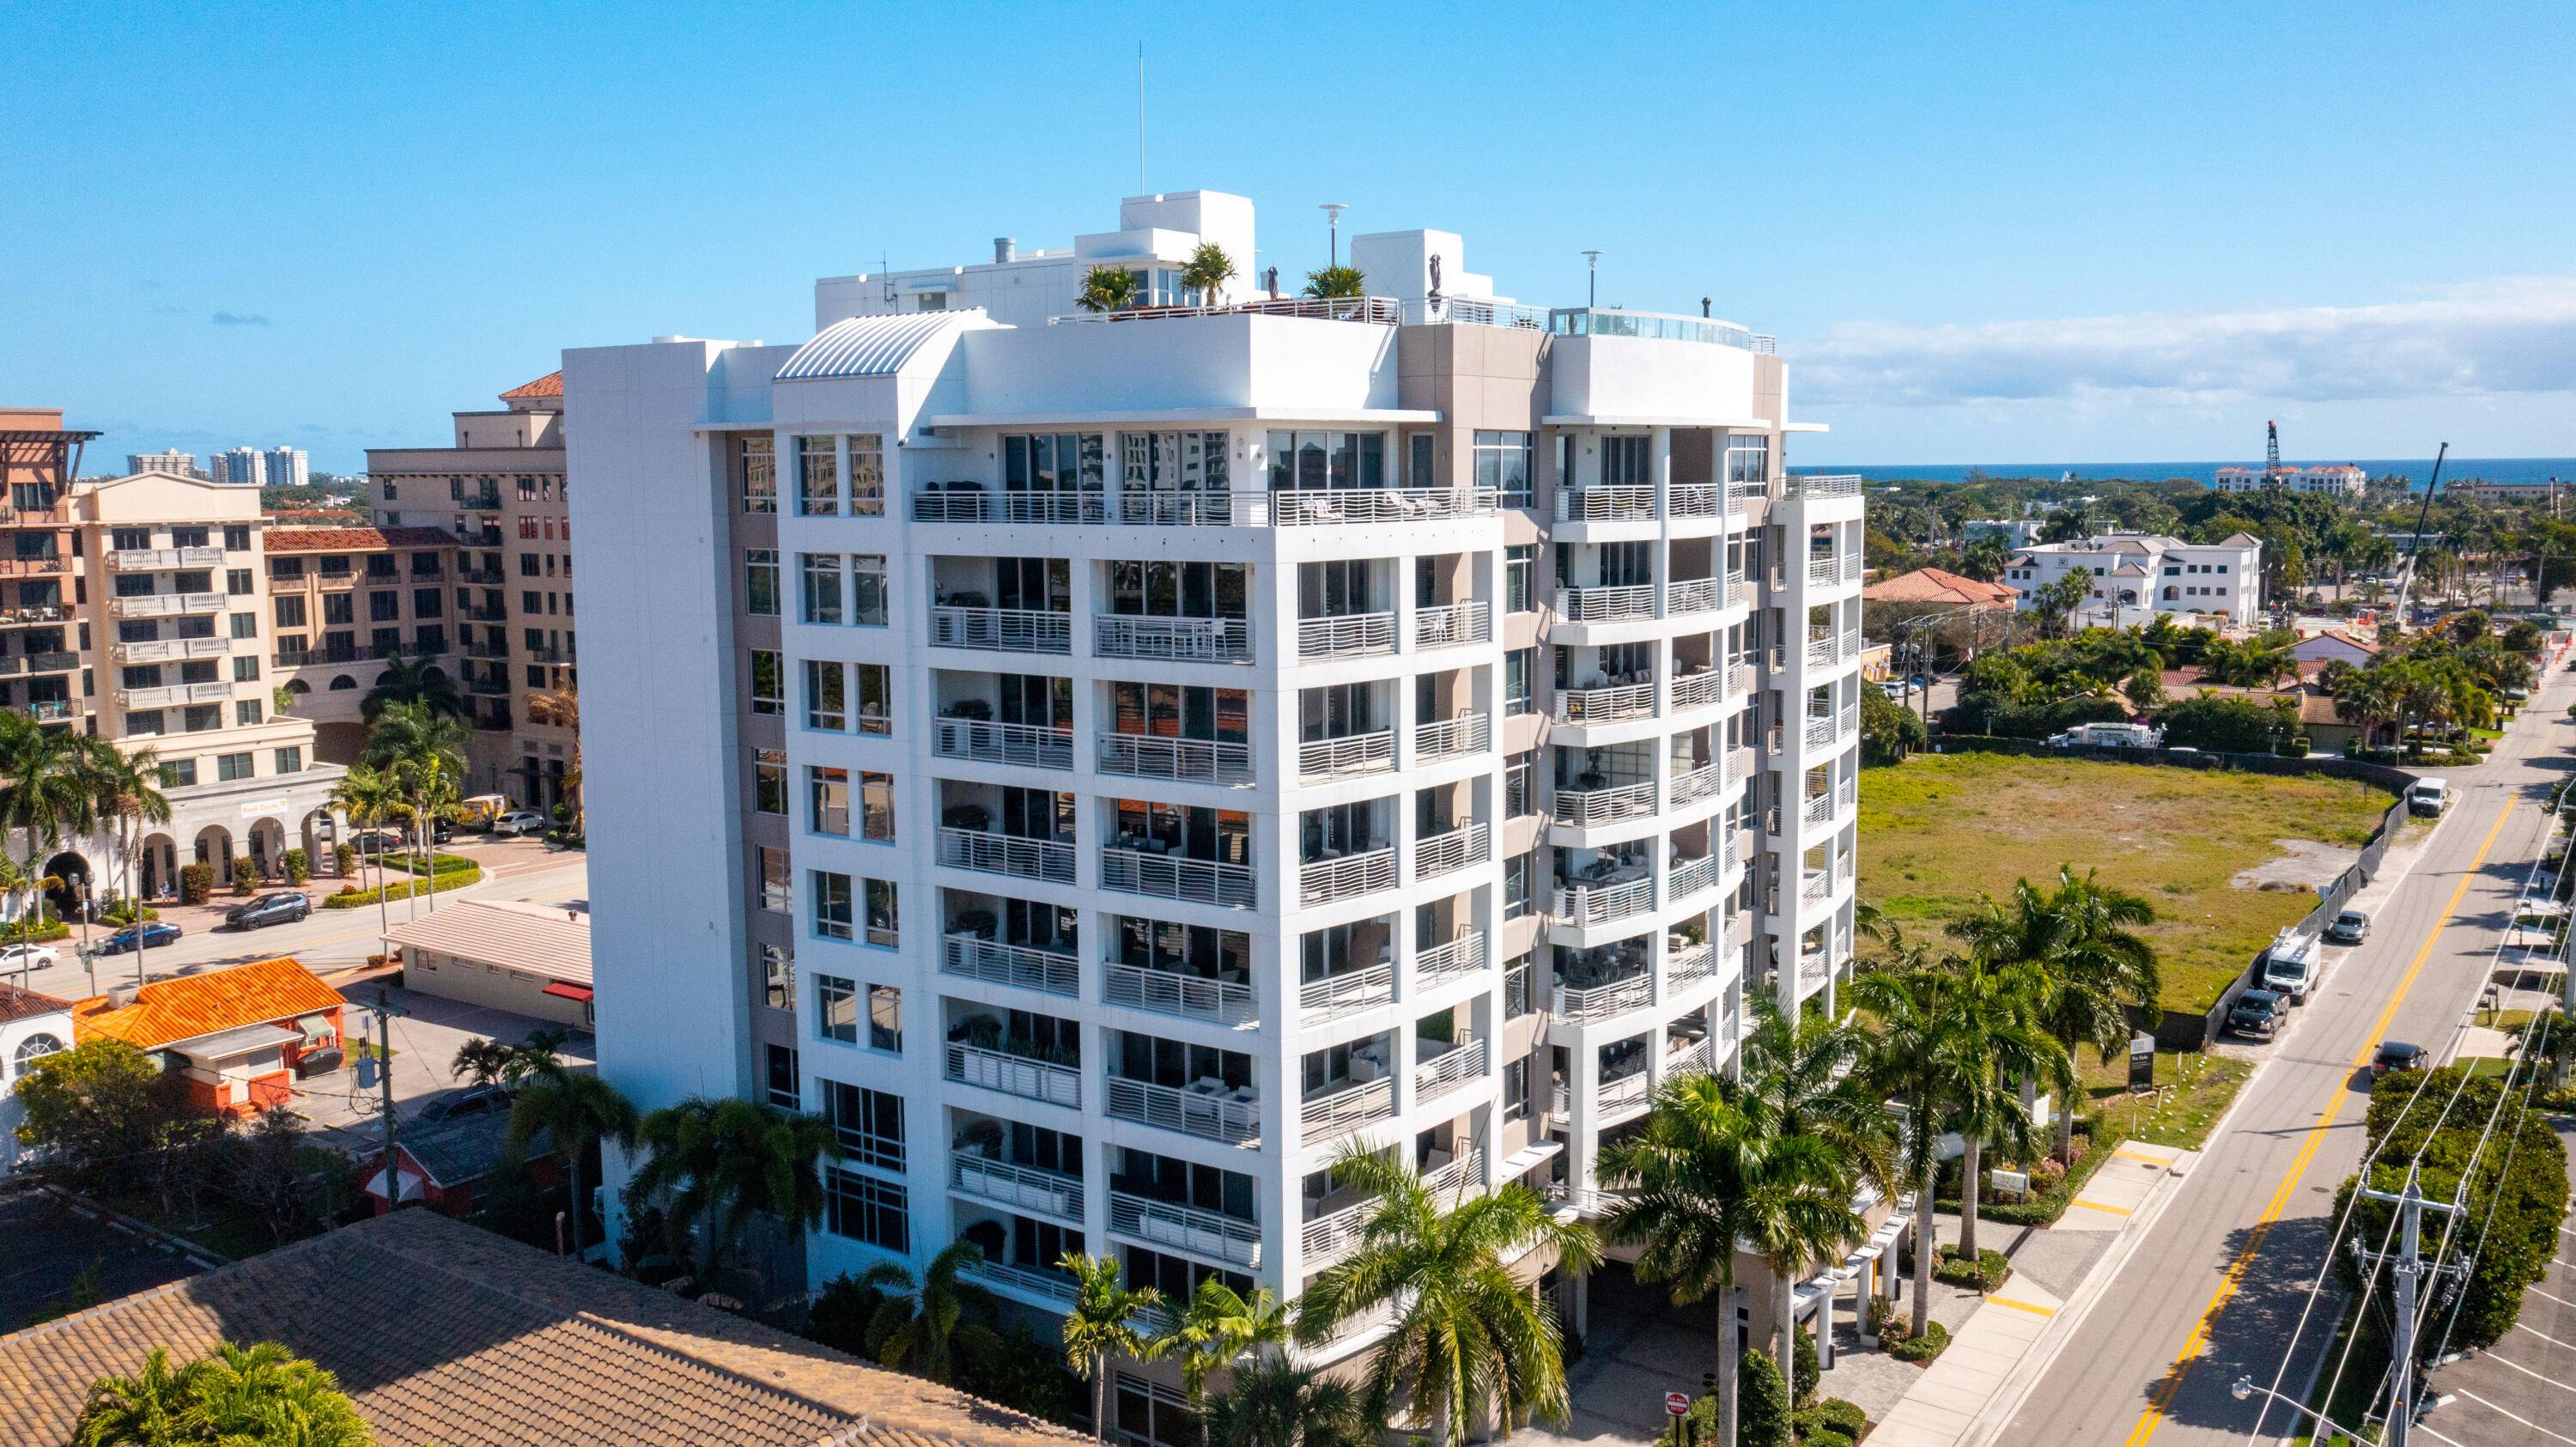 327 Royal Palm sets the standard for upscale boutique condominium living in the heart of downtown Boca Raton.